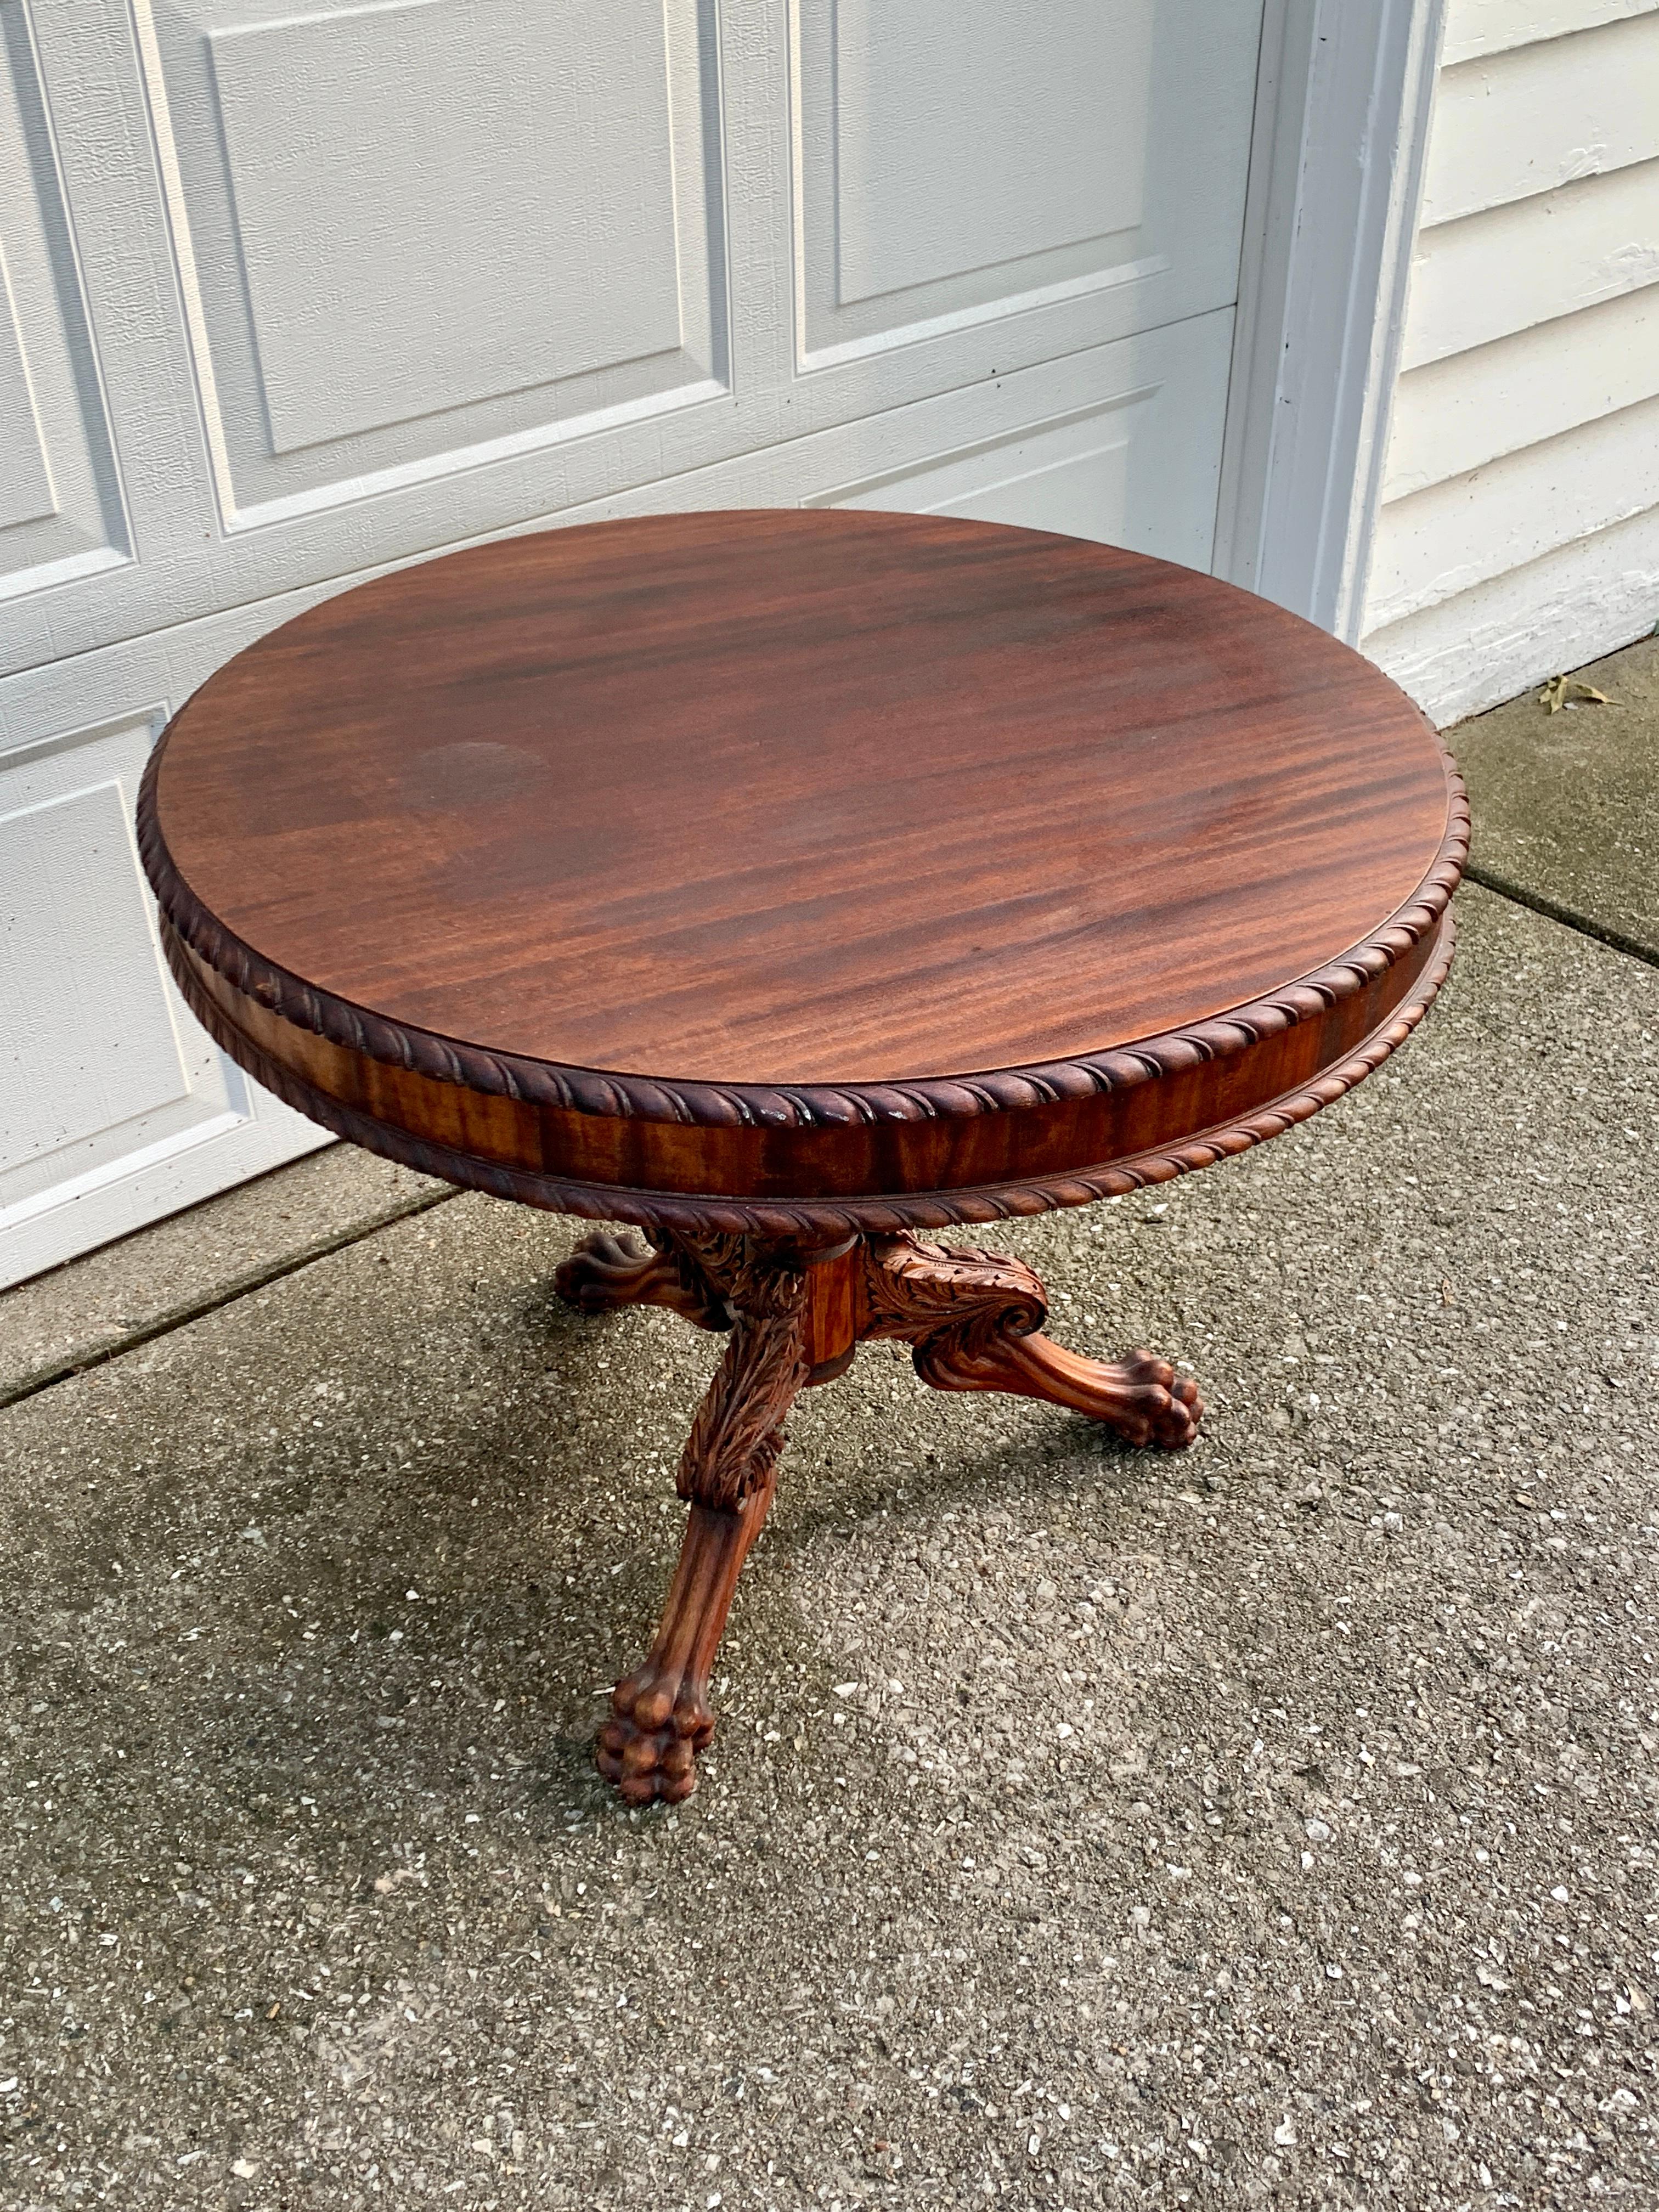 Antique American Empire Mahogany Paw Foot Pedestal Side Table, Late 19th Century For Sale 2